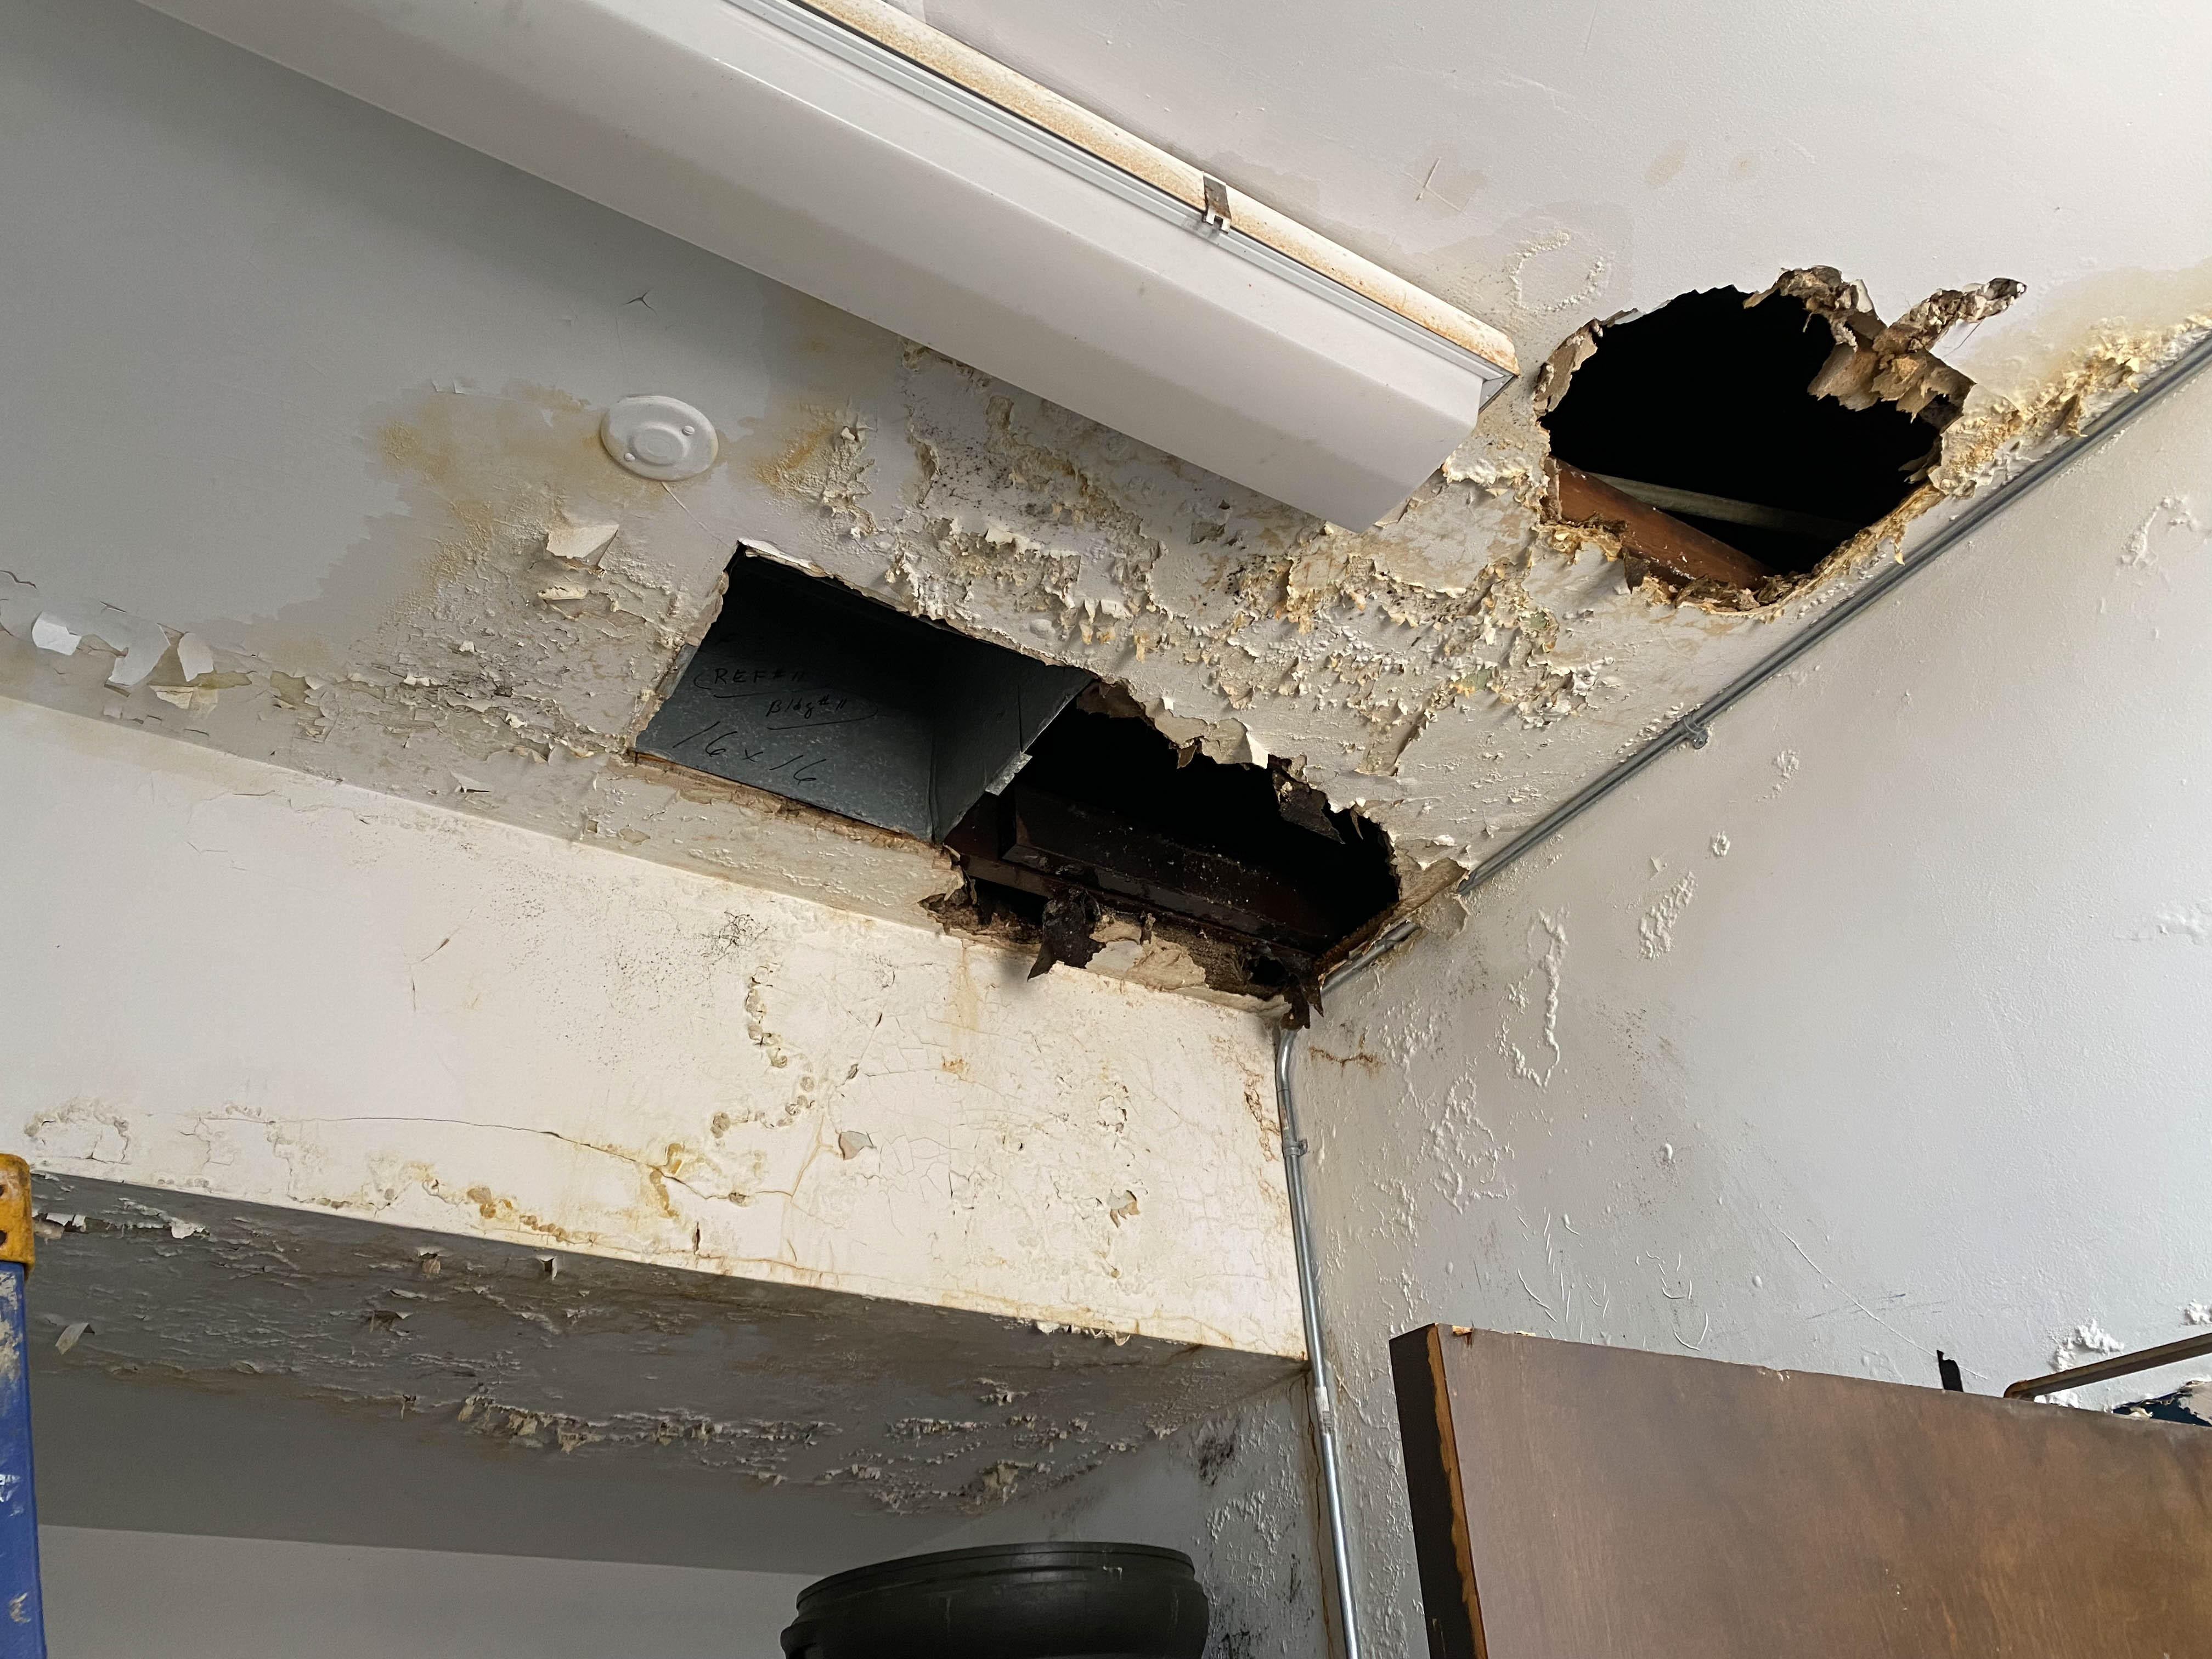 Do you need water damage restoration service? SERVPRO of Boston Downtown / Back Bay / South Boston  and SERVPRO of Dorchester has the latest equipment and the right people to get the job done efficiently and effectively! Give us a call!